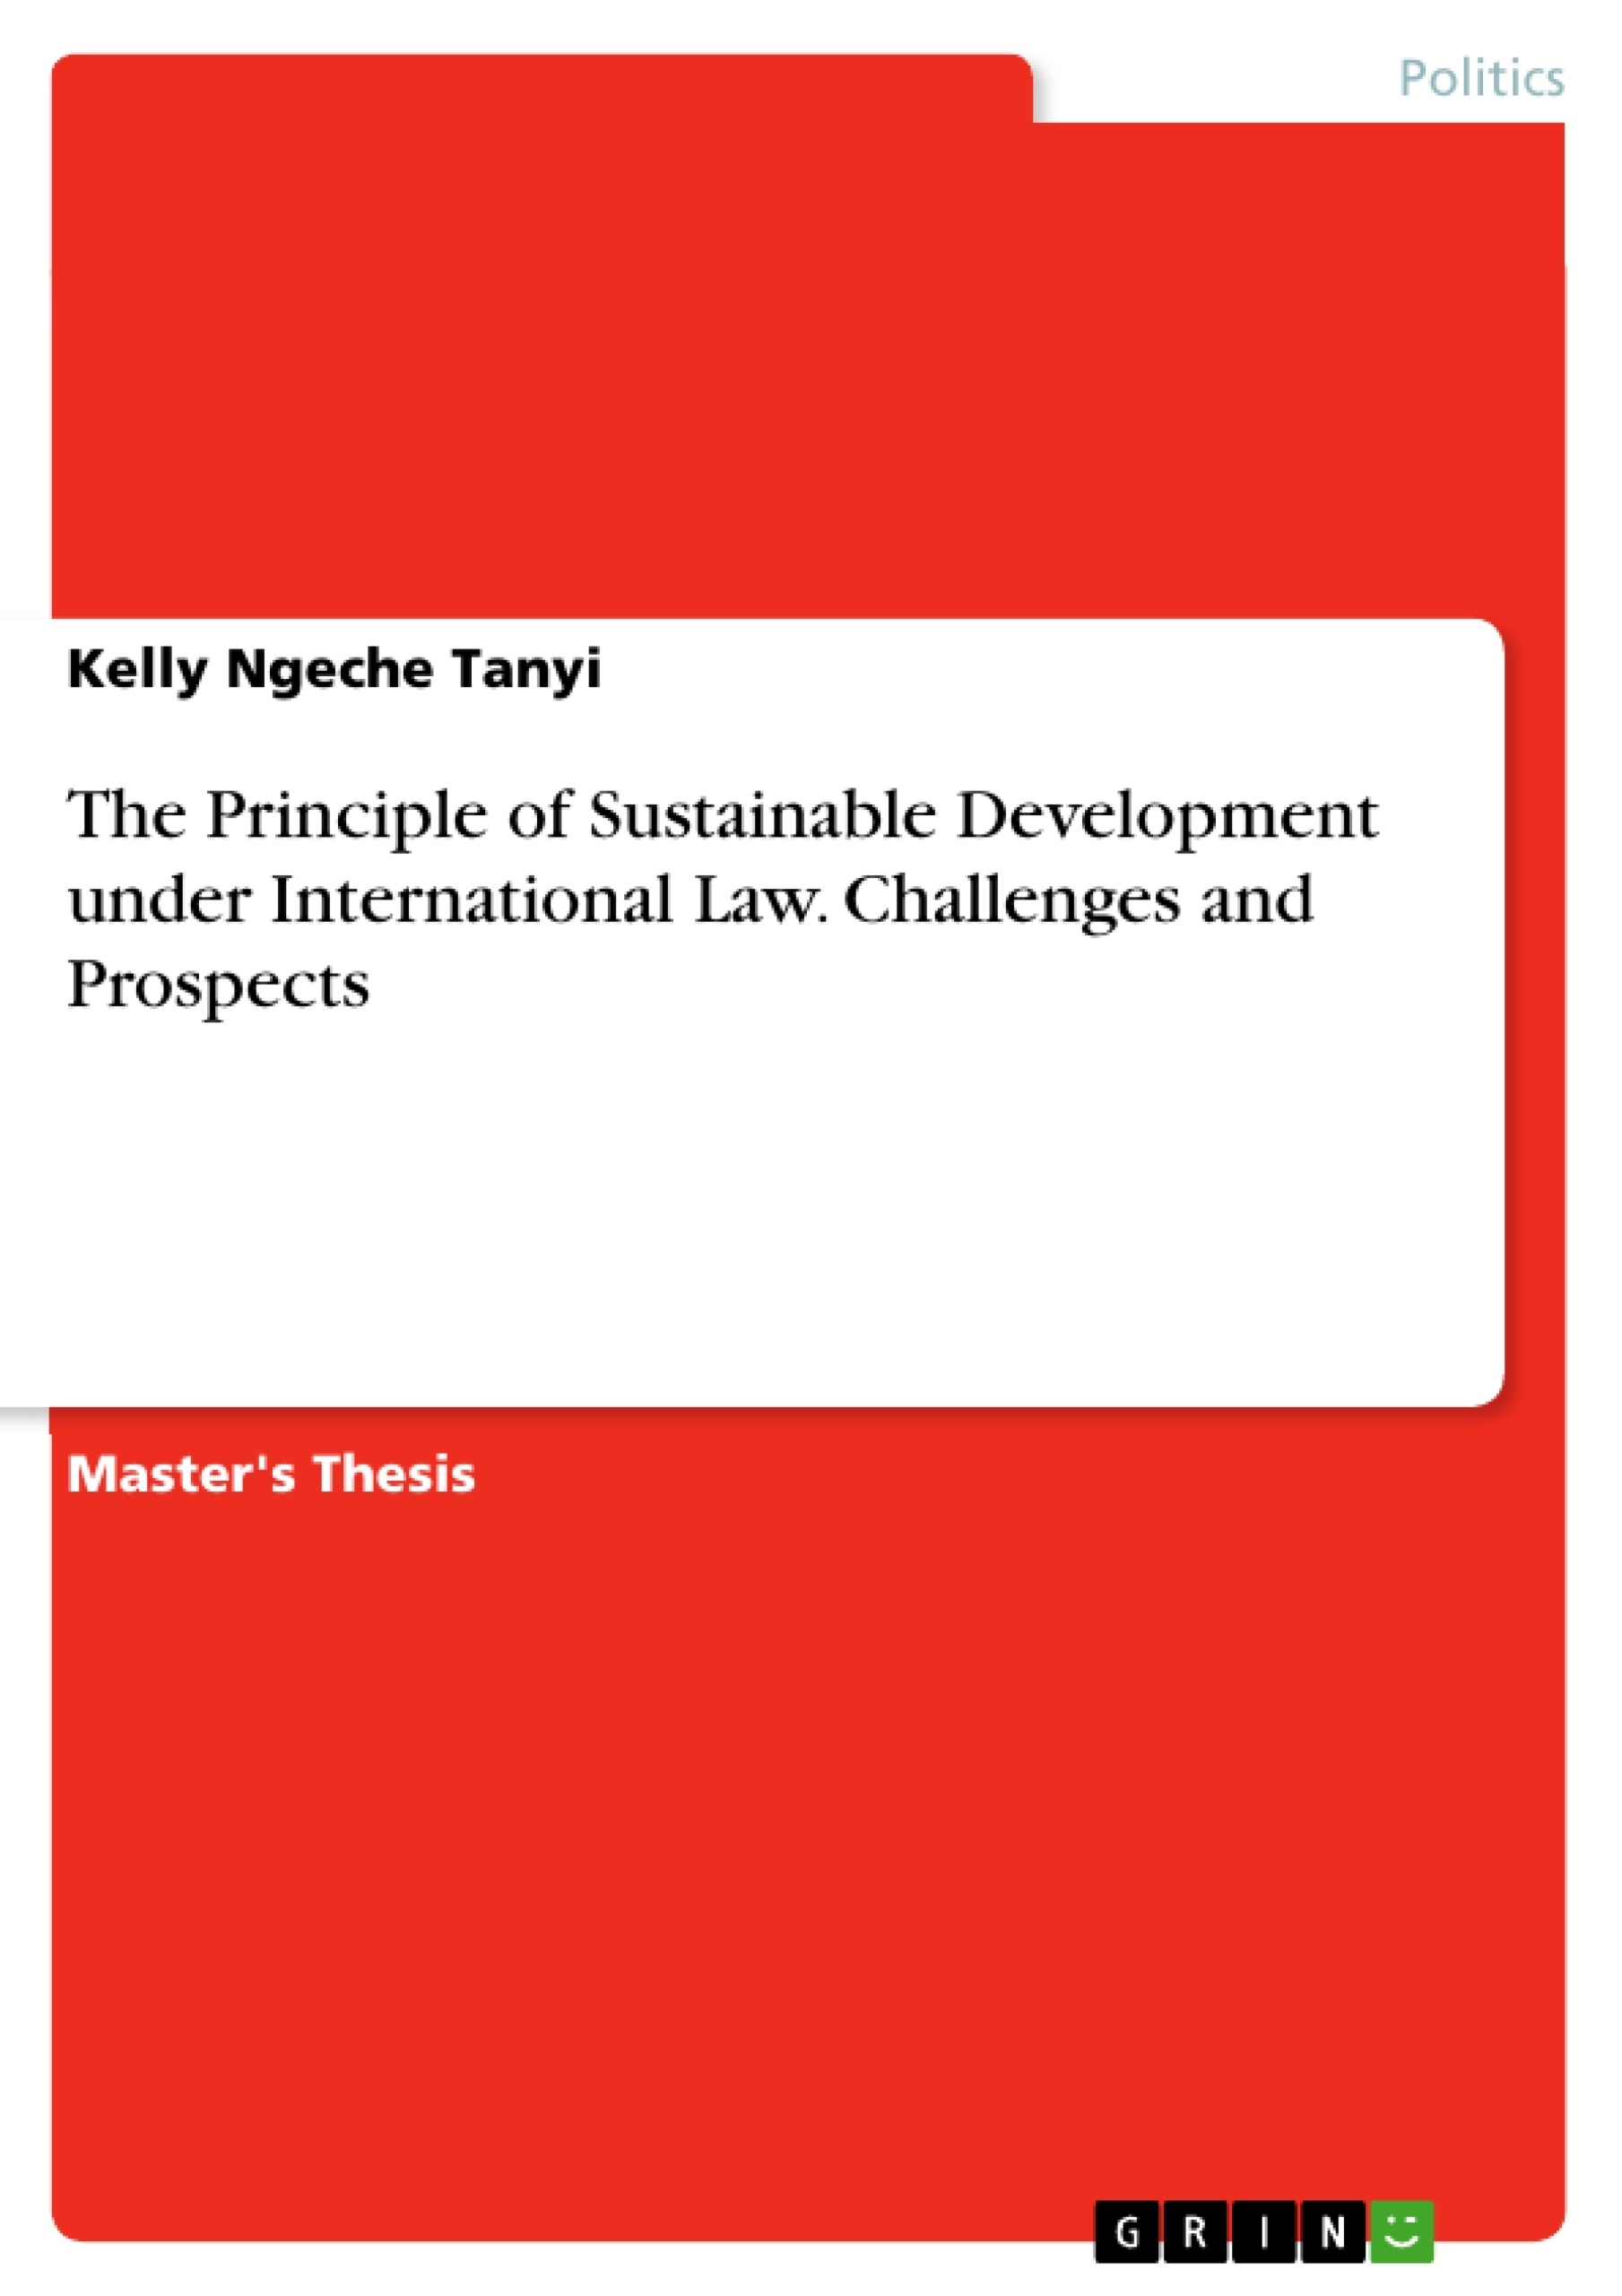 International　Prospects　of　Challenges　and　Principle　The　under　Law.　Sustainable　Development　GRIN